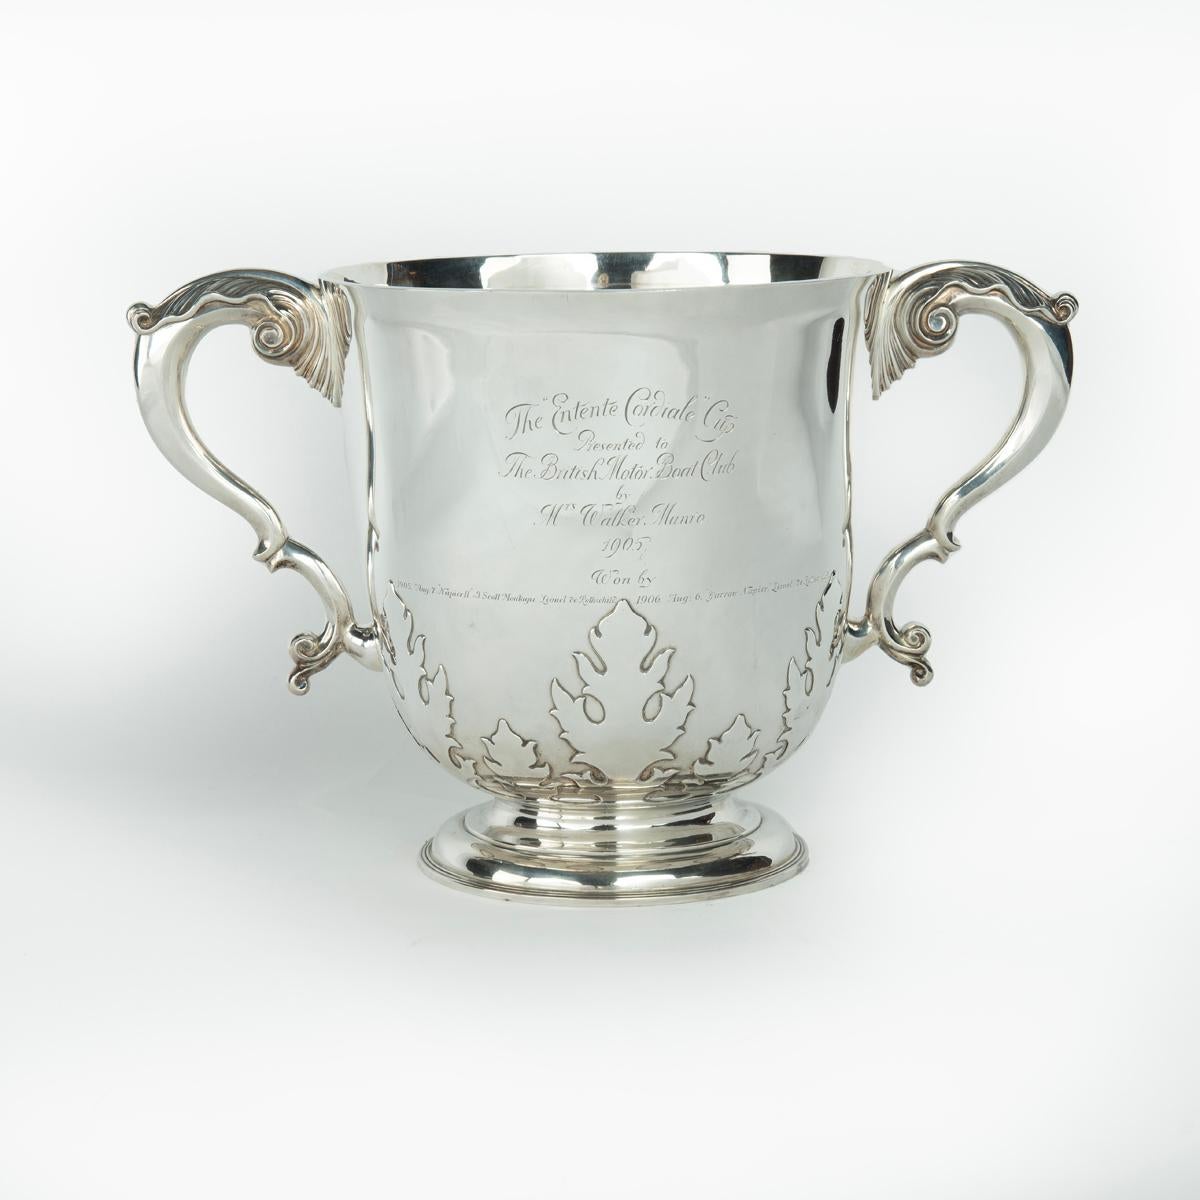 The ‘Entente Cordial’ silver champagne cooler for the British Motor Boat Club, 1905. This deep cylindrical bowl by Charles Townley and John Thomas is of heavy gauge with a raised circular foot, two acanthus scroll handles and cut-card acanthus